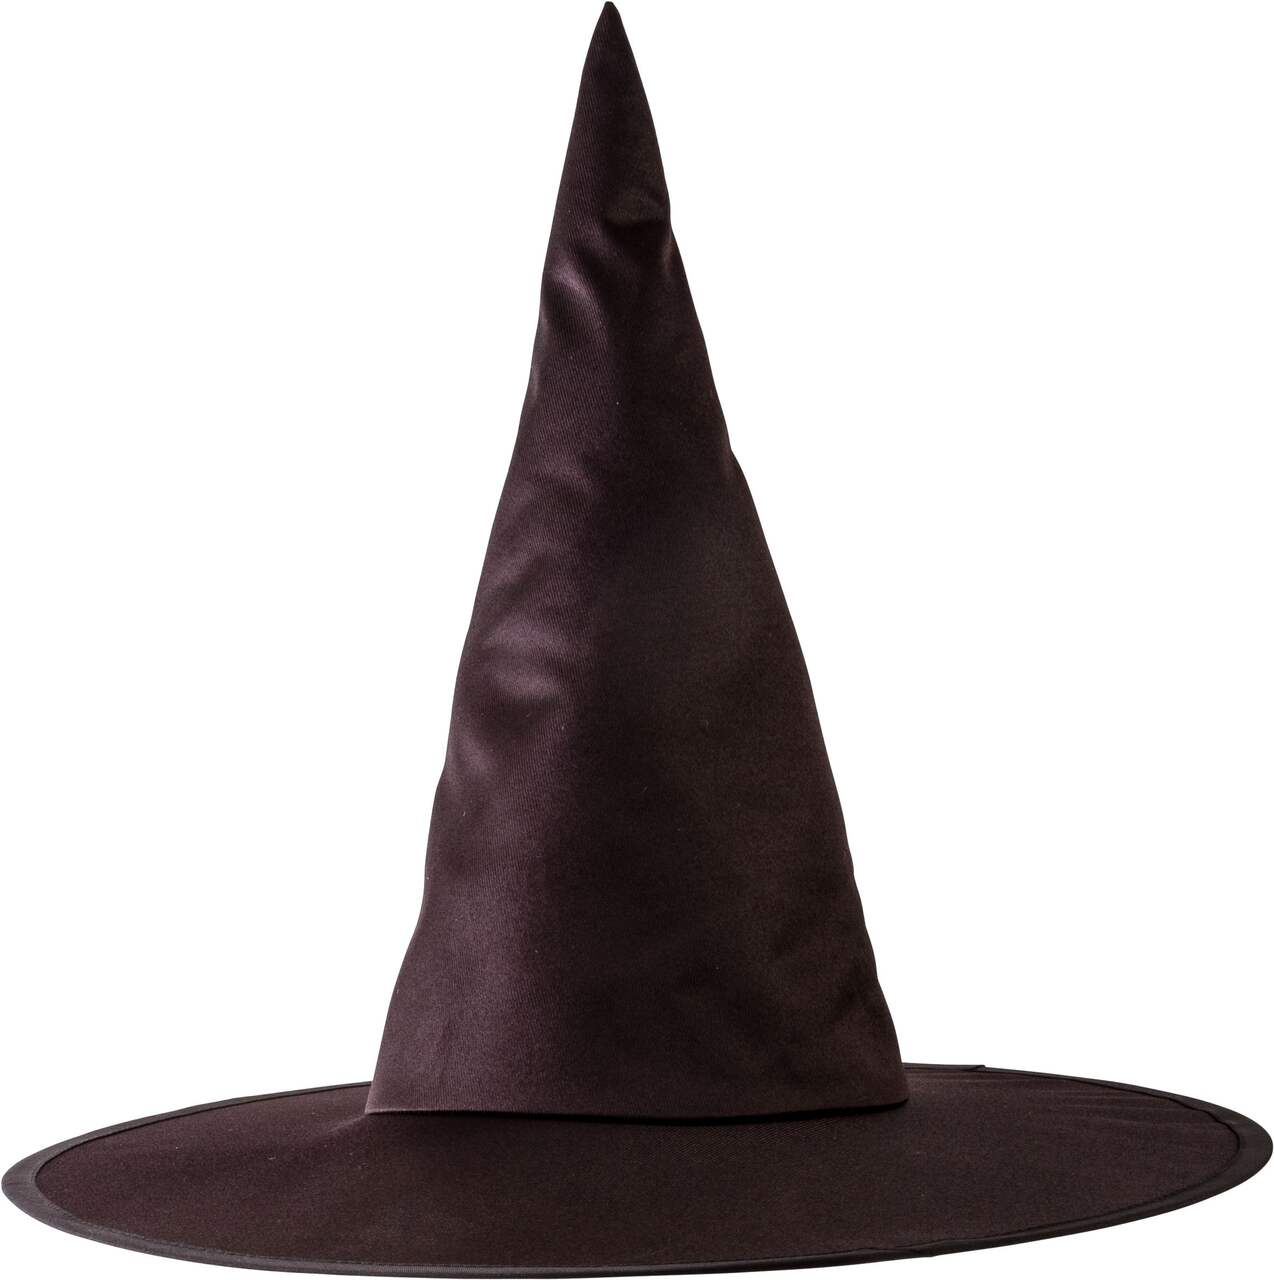 https://media-www.canadiantire.ca/product/seasonal-gardening/party-city-seasonal/party-city-halloween-and-fall-decor/8510045/pc-classic-witch-hat-9b49e13b-7bb8-4a46-98c4-472dd44549f0-jpgrendition.jpg?imdensity=1&imwidth=1244&impolicy=mZoom